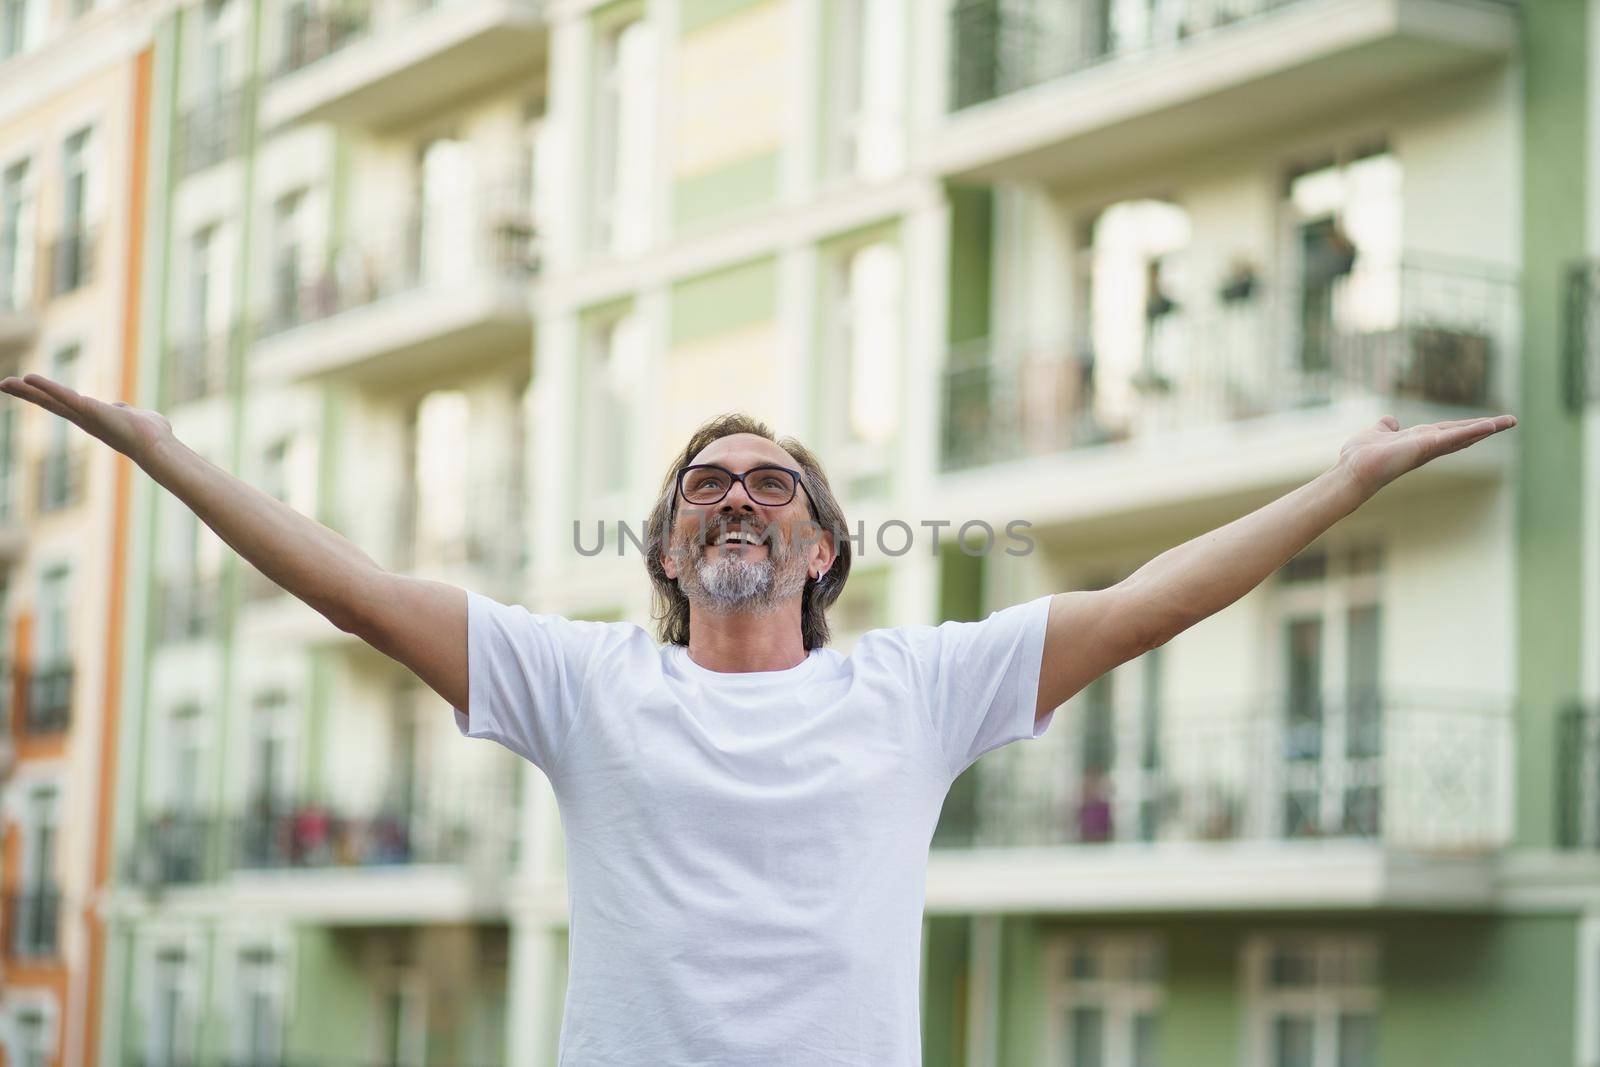 Middle aged man spread his hands in the air praising God standing outdoors wearing white t-shirt and eye glasses. Middle aged man glad that life is beautiful standing in old town street.